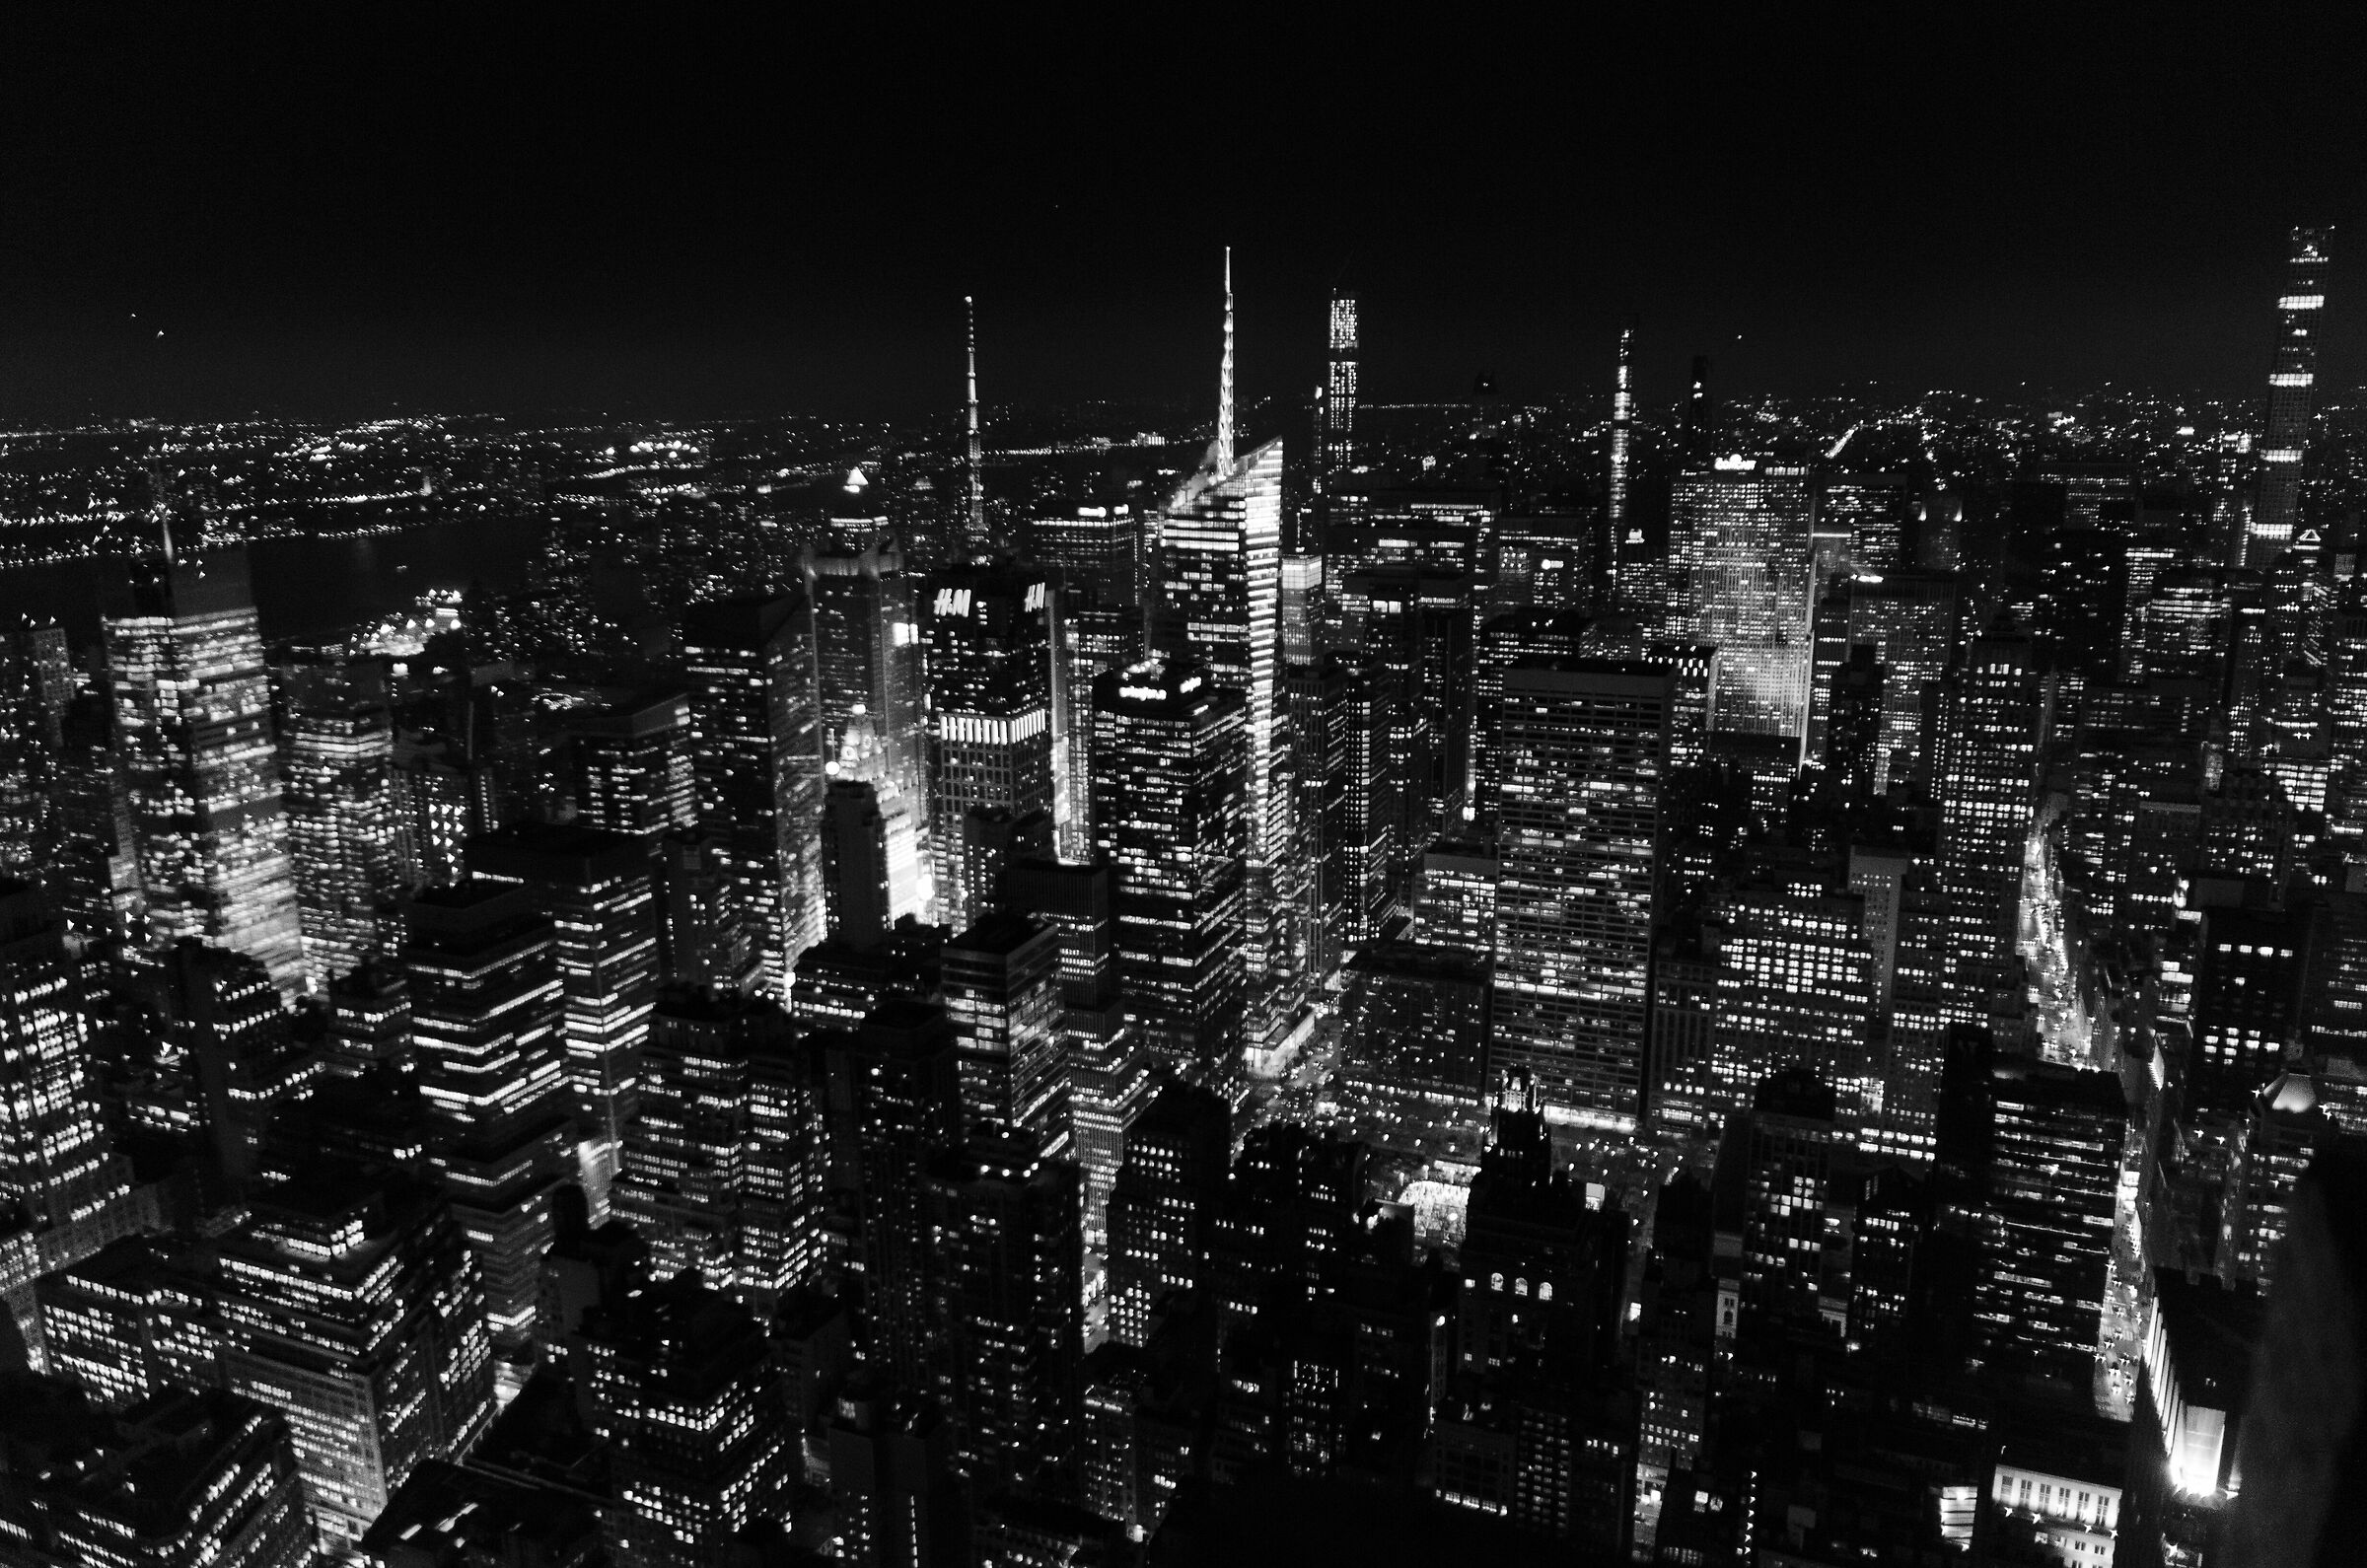 NYC in the dark...